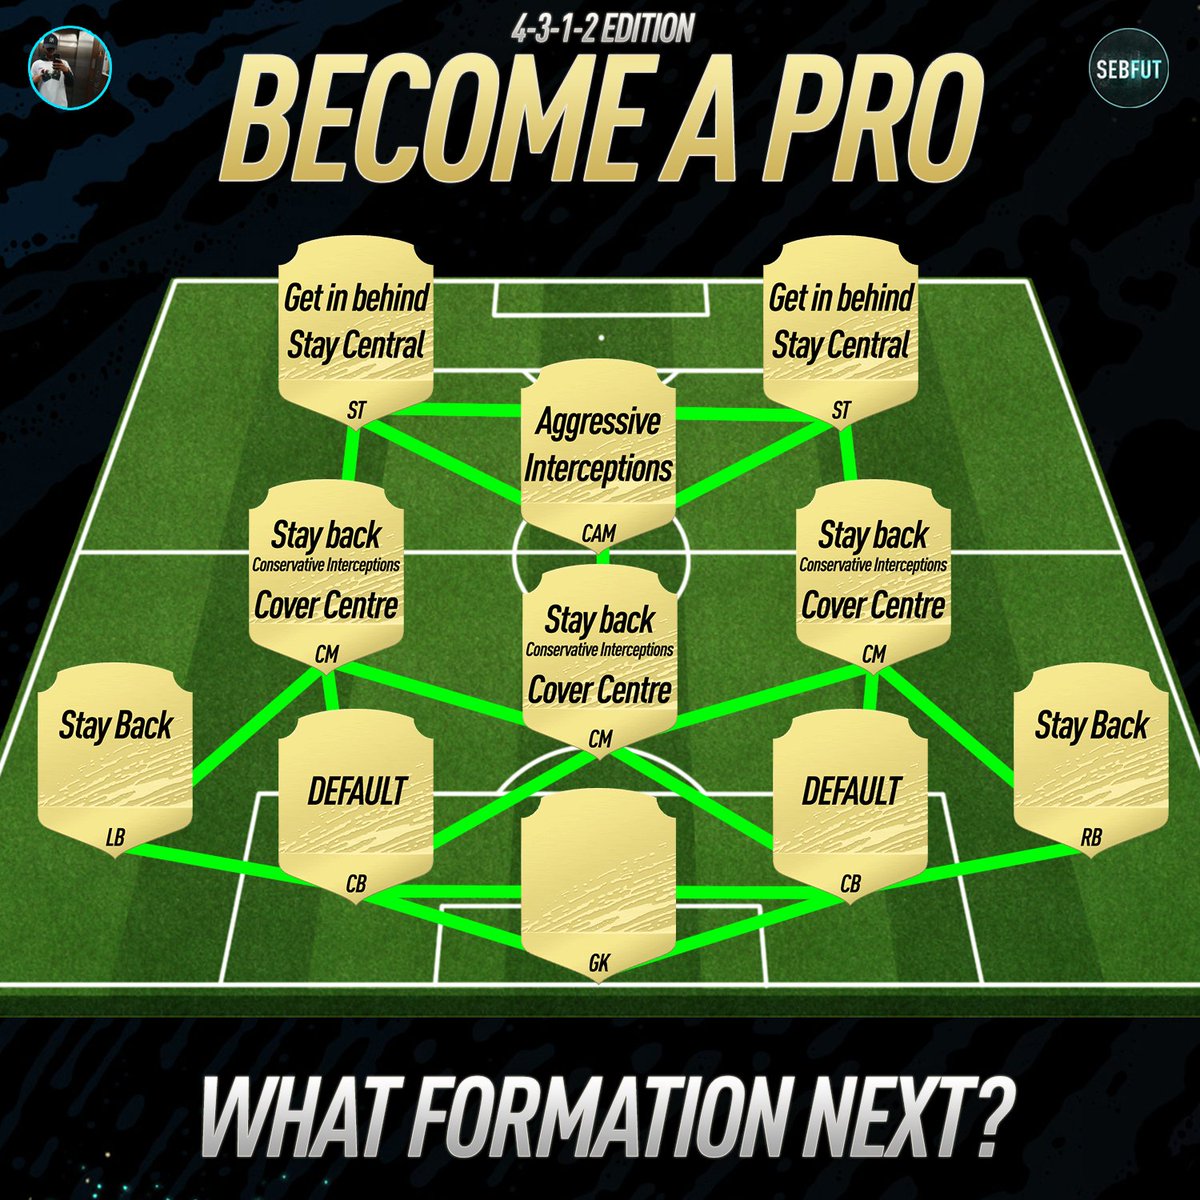 Mbckaylan You Guys Asked For It So Here It Is 4312 Custom Tactics And Instructions Try Them Out And Let Me Know How It Is Collab With Sebfut T Co 4kuhntamlu